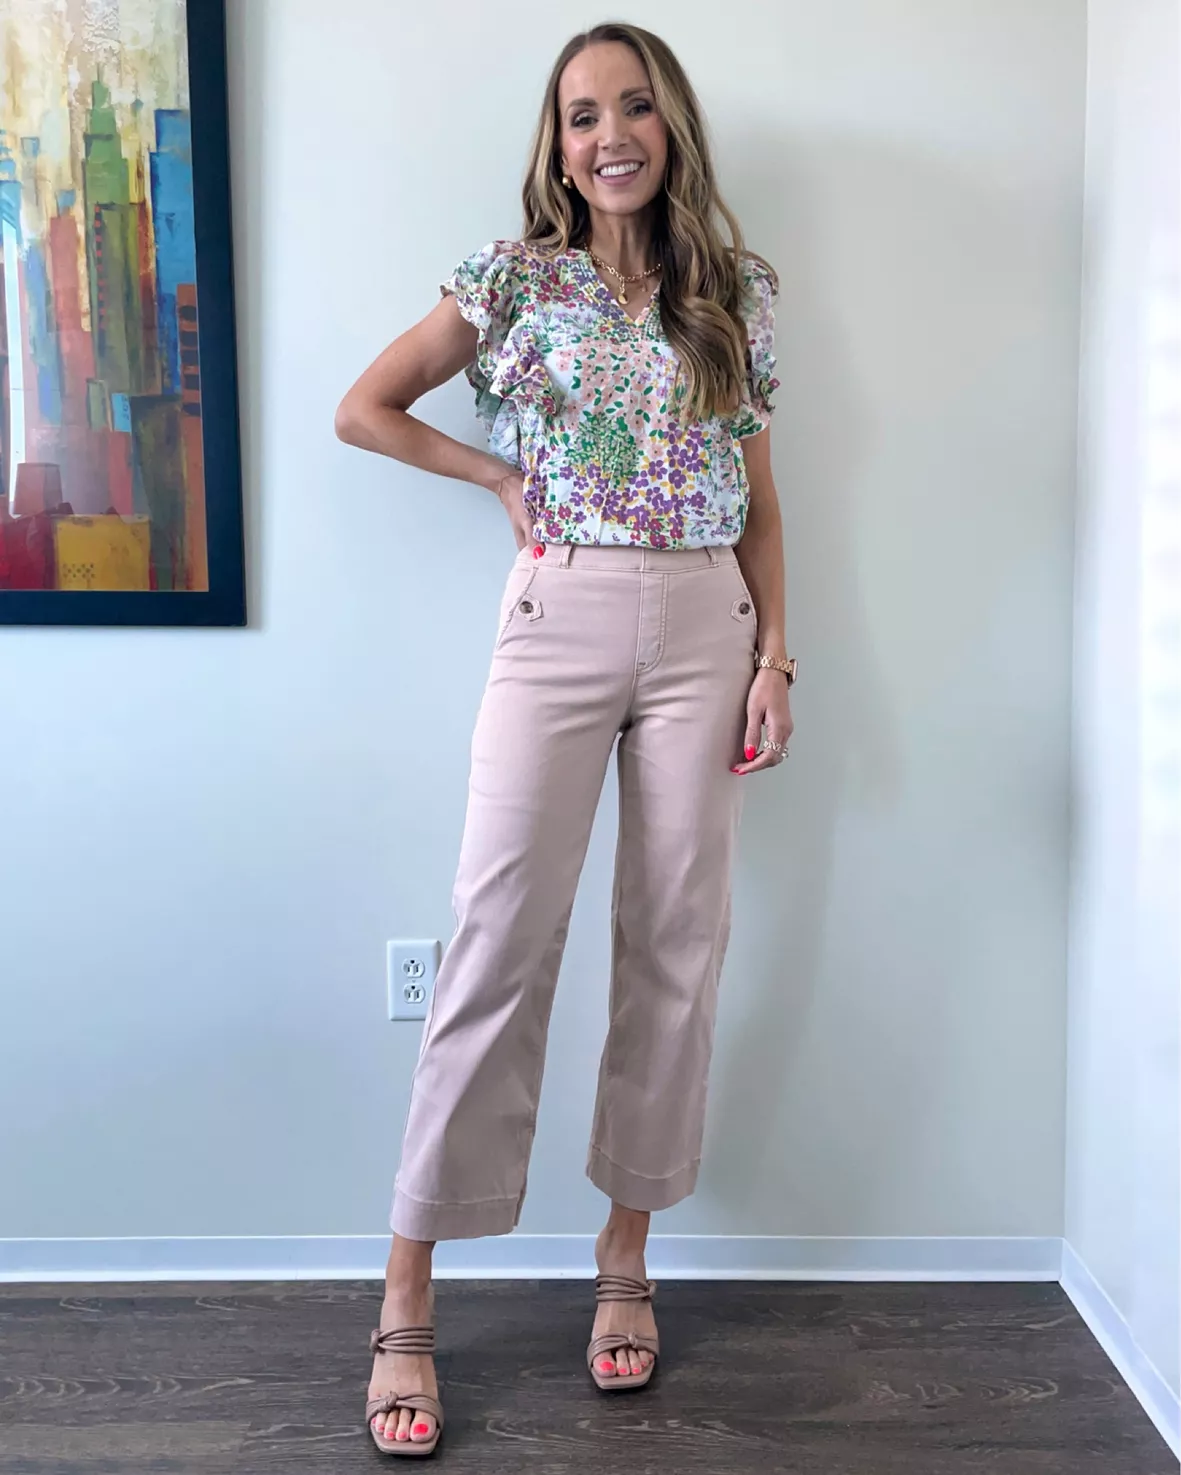 How to Wear Cropped Wide Leg Pants - Merrick's Art  Wide leg jeans outfit,  Wide leg pants outfit, Wide leg trousers outfit